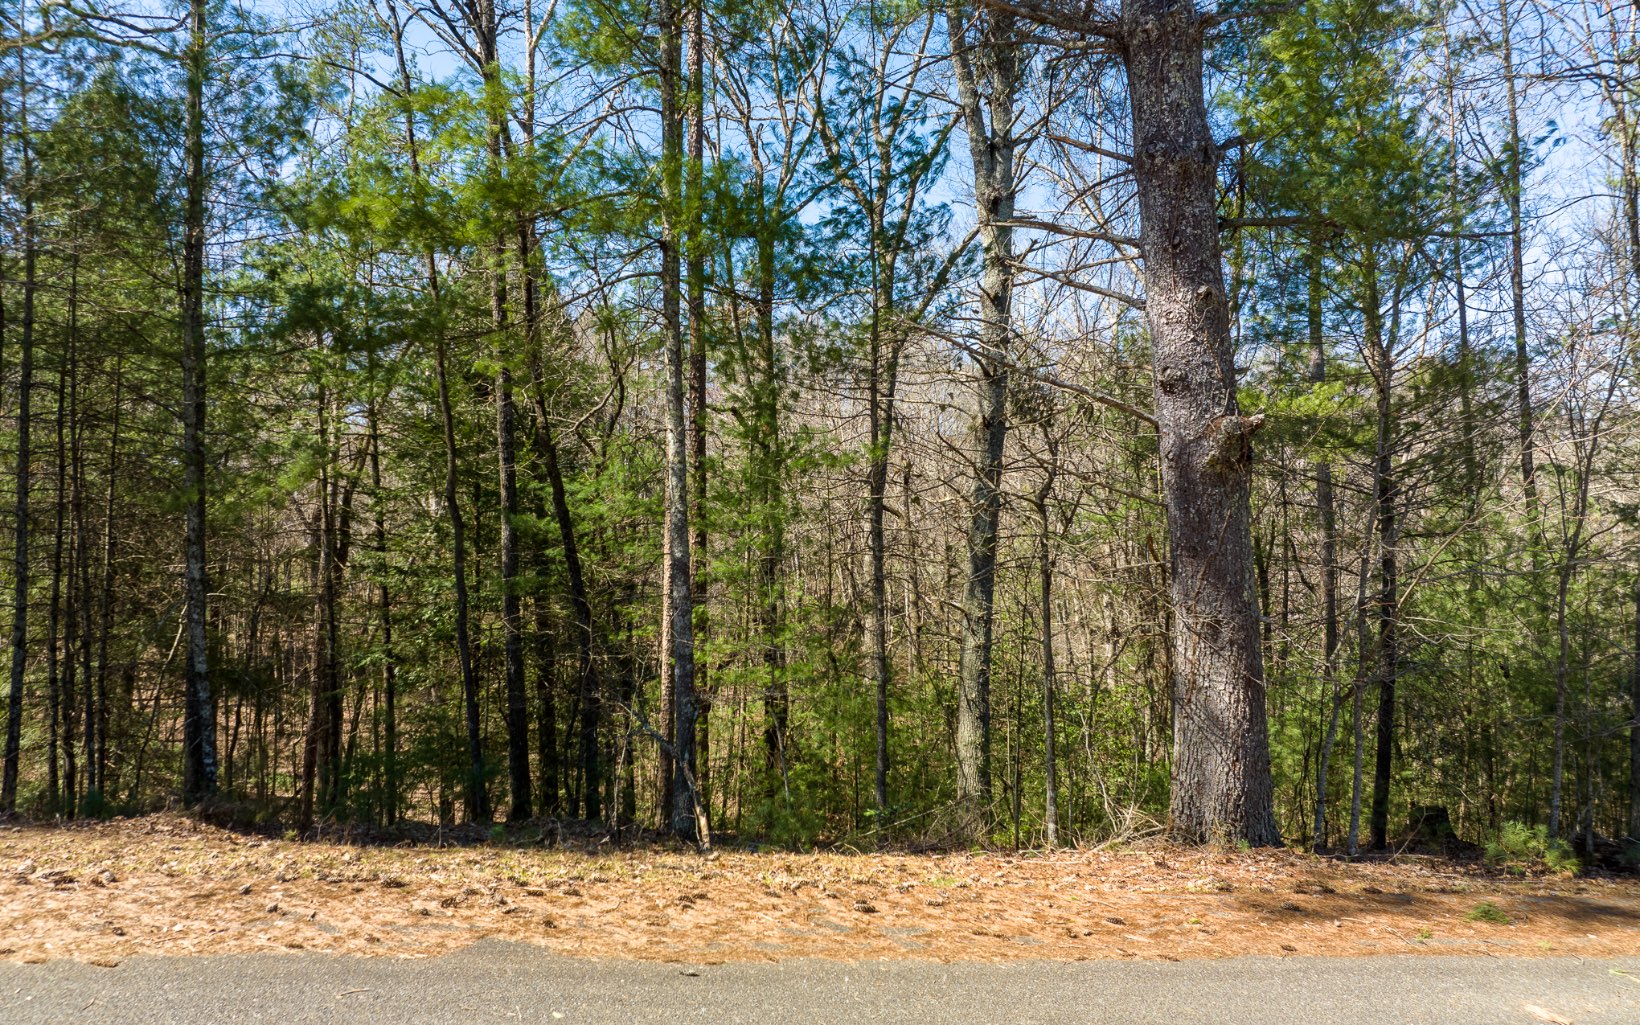 One of the most affordable lots for sale in Buckhorn Estates. This lot is .74 acres & offers a seasonal mountain view from the front of the lot; sloped, yet buildable. It's conveniently located between Blue Ridge and Ellijay with all paved roads, high speed internet, cable TV, & low HOA fees of only $225 per year. Buckhorn Estates offers a beautiful river park, an 8 acre fishing lake and the pleasure of driving your golf cart over to Whitepath Golf Course. (18 hole GOLF COURSE open to the public.) This community has everything you enjoy about the mountains and is only 10 minutes to town. *Gilmer County offers "no school tax" for full time residents over the age of 65.*